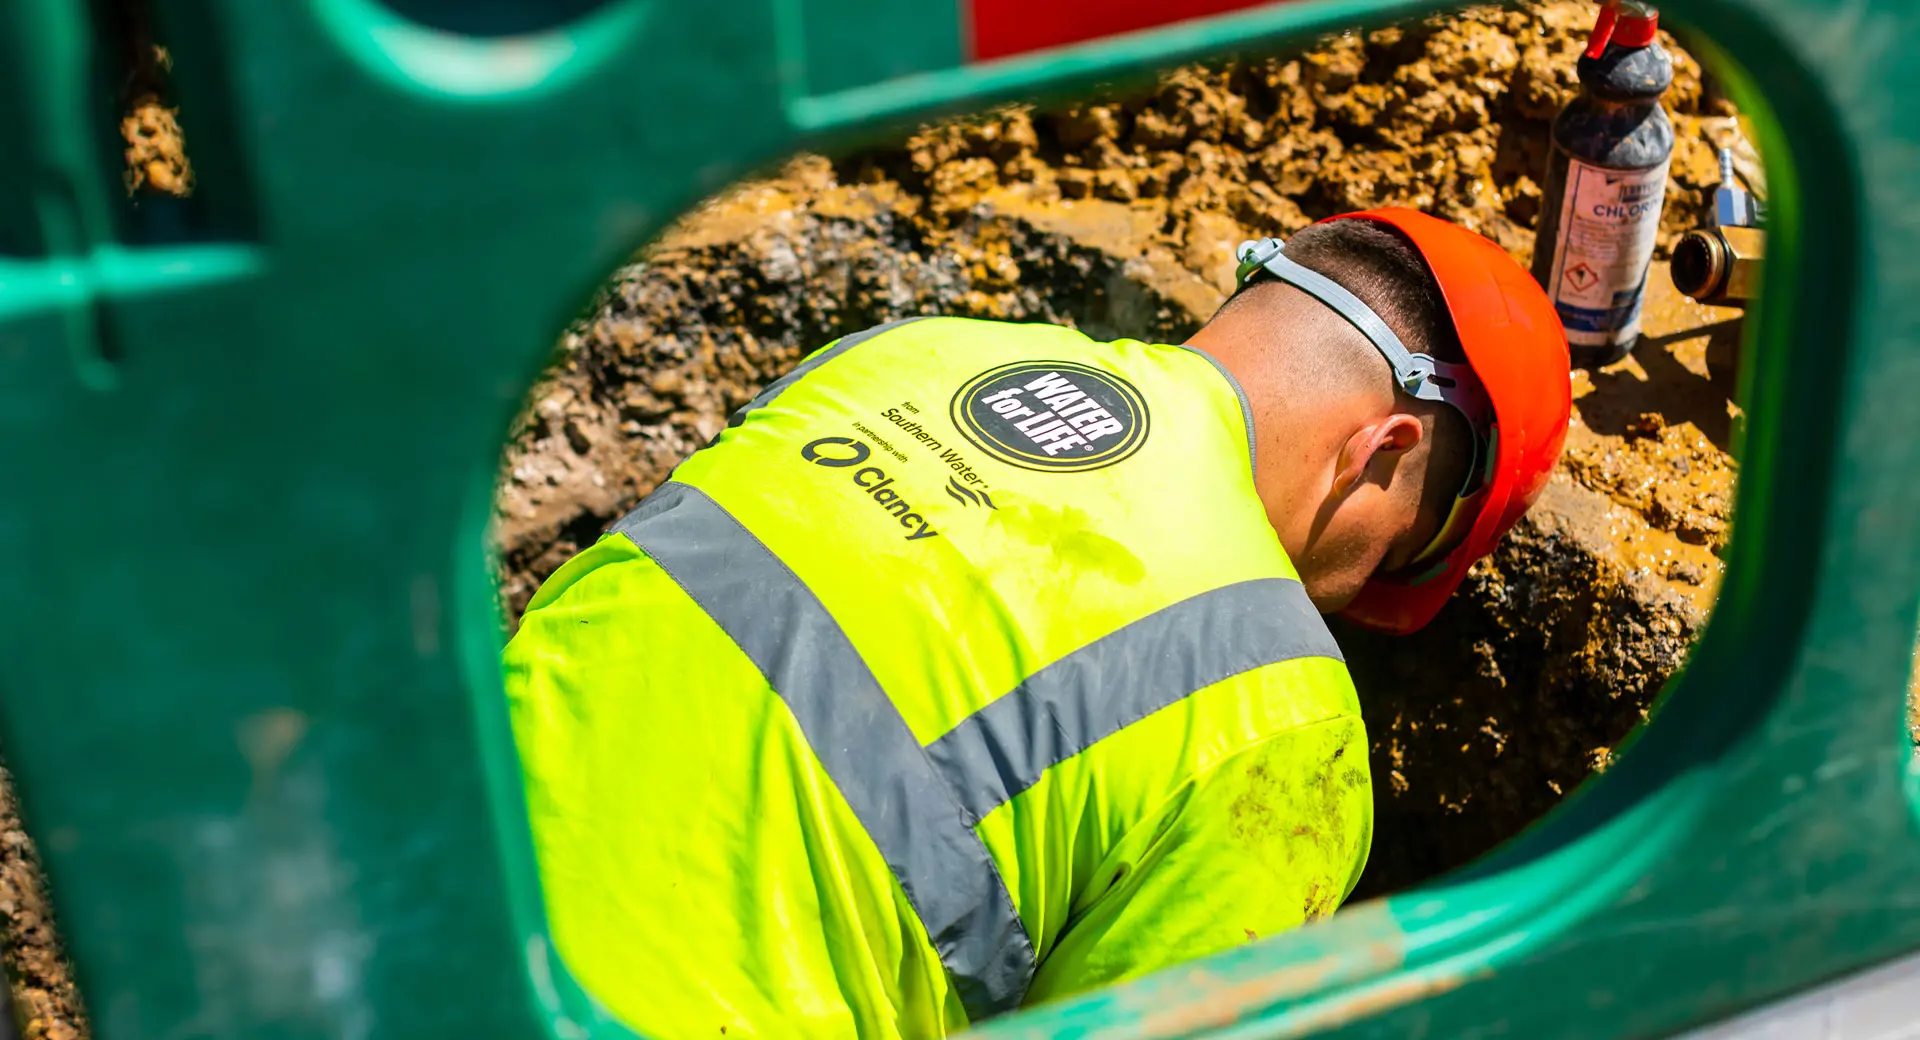 A close-up of a plastic barrier. On the other side of the barrier, a Clancy Repair Team engineer works in an excavated area of ground